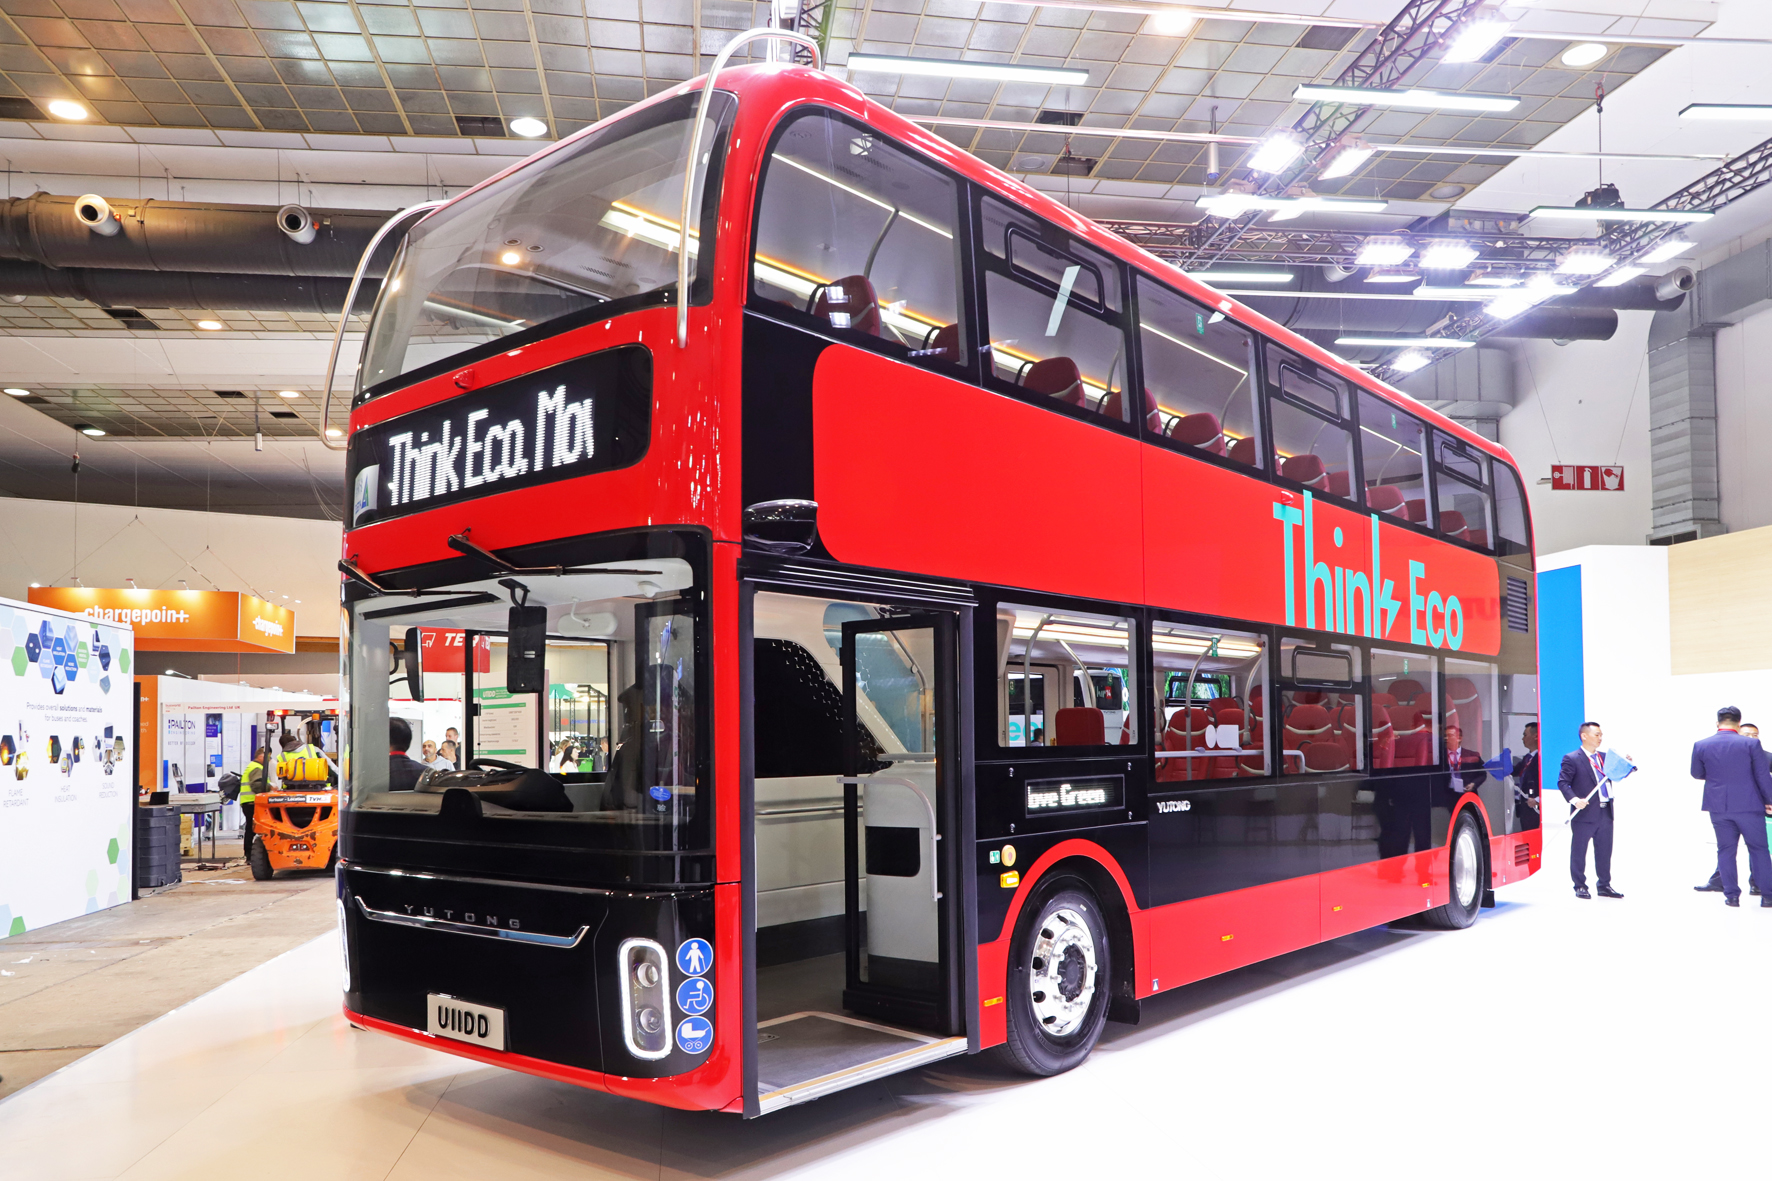 New Yutong electric double-decker revealed at Busworld